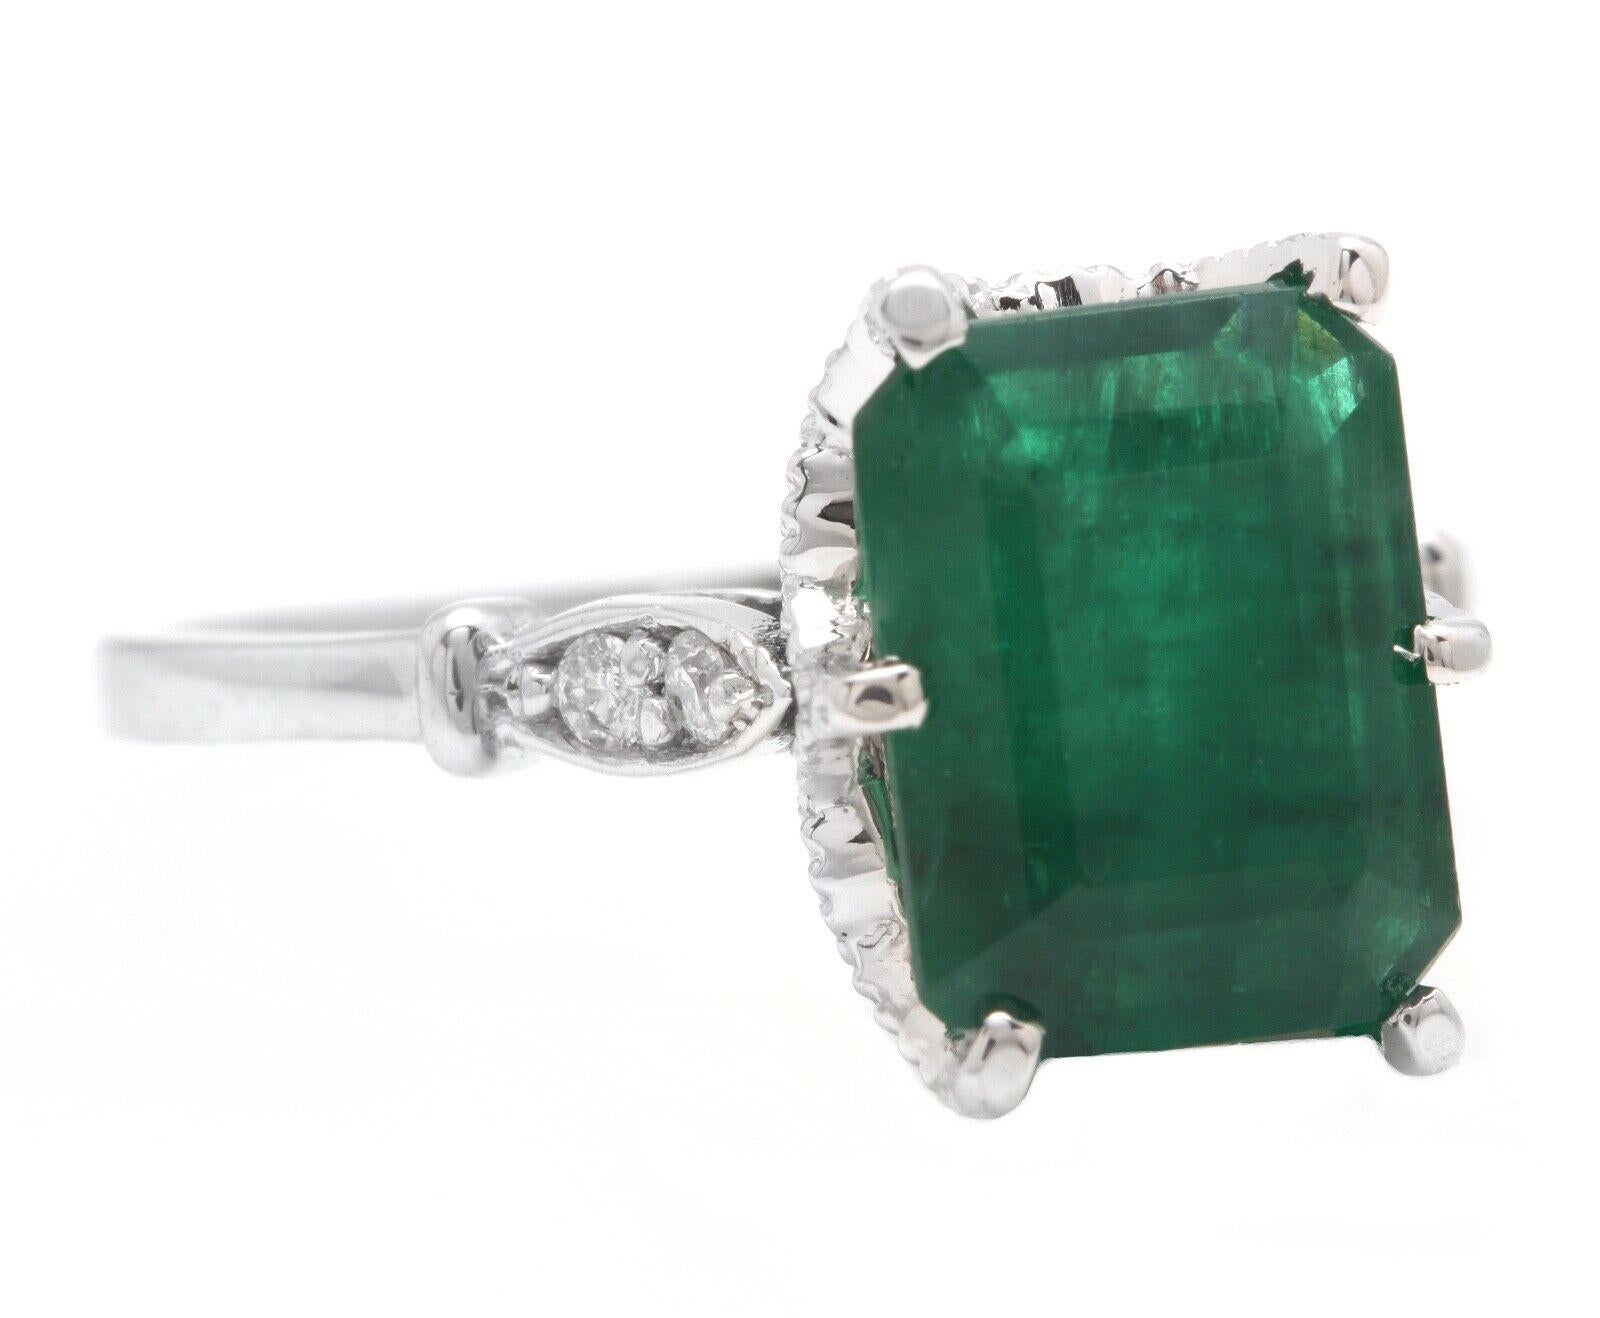 3.38 Carats Natural Emerald and Diamond 14K Solid White Gold Ring

Suggested Replacement Value: $5,000.00

Total Natural Green Emerald Weight is: Approx. 3.30 Carats (transparent)

Emerald Measures: Approx. 10.00 x 8.00mm

Natural Round Diamonds